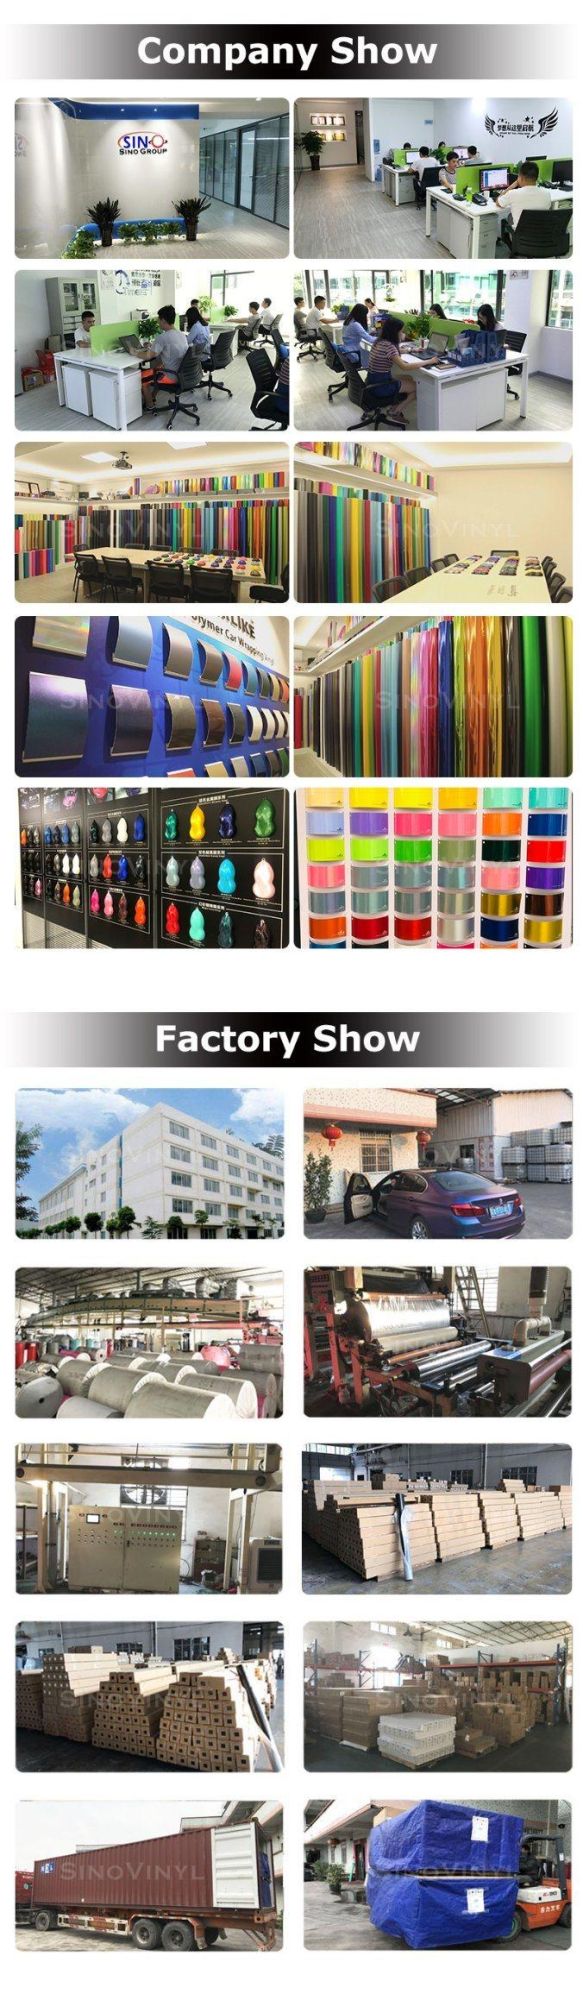 SINOVINYL High Quality Manufacturer Selling PVC Material Vinyl Chrome Brushed Wrapping Wrap